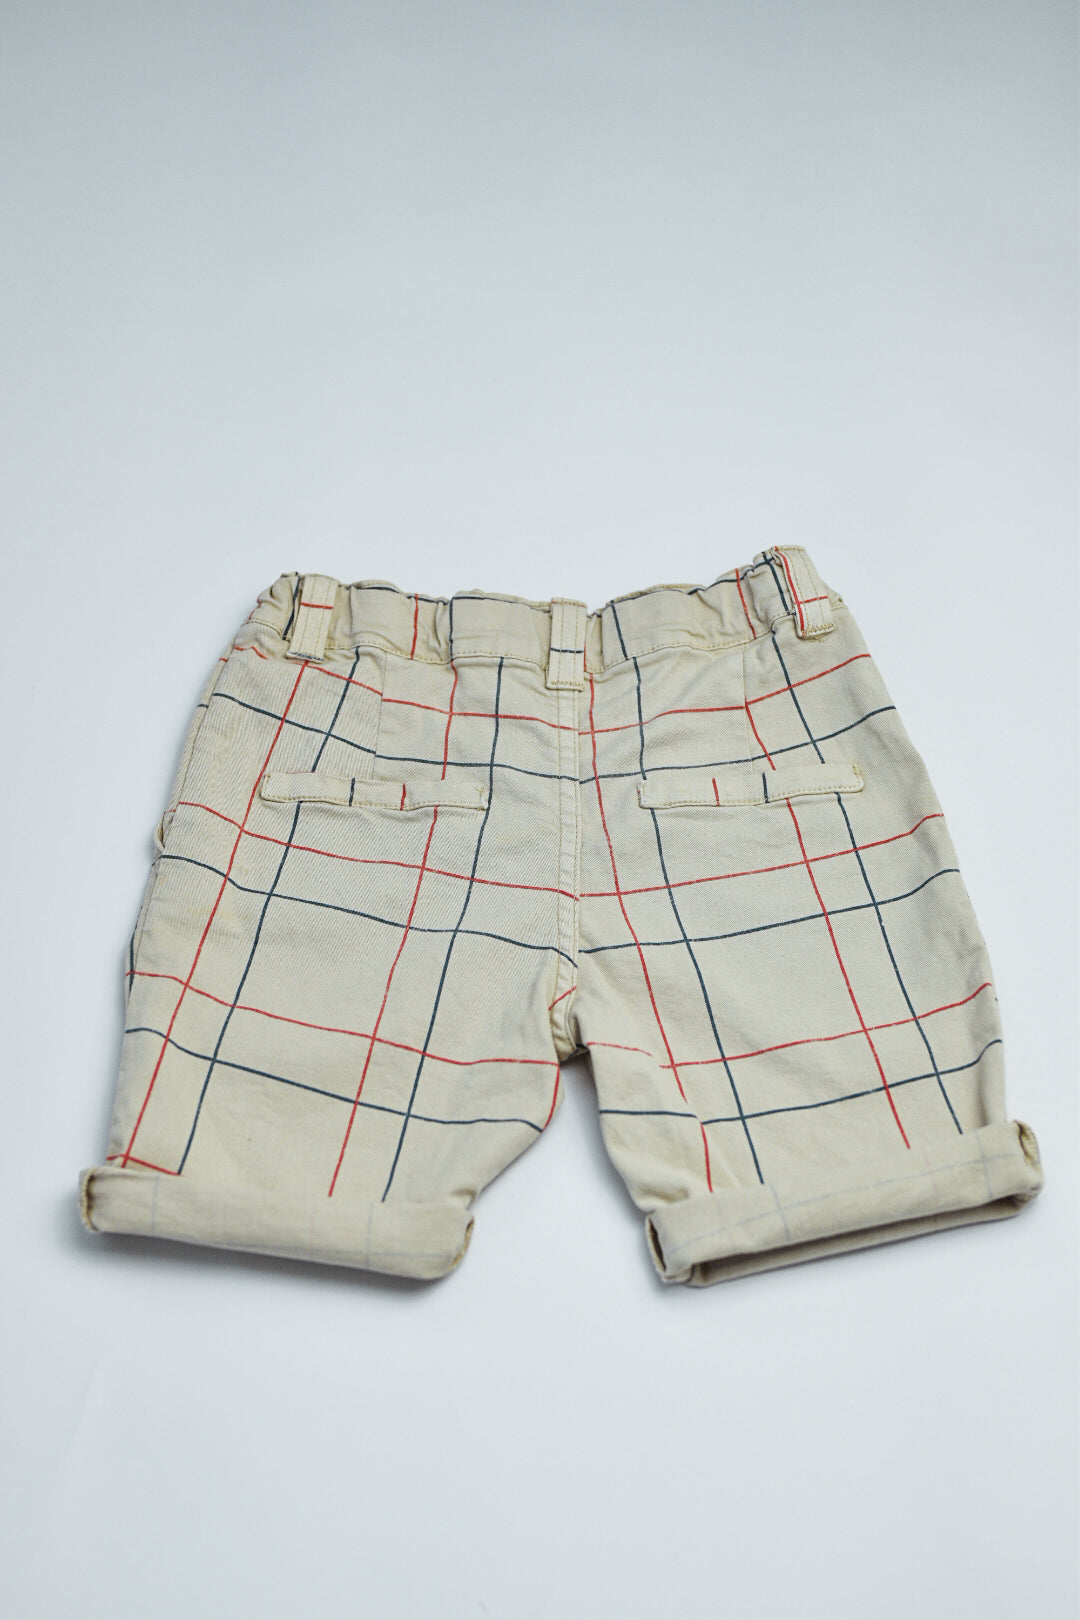 RE LOVED Bobo Choses check short size 4-5